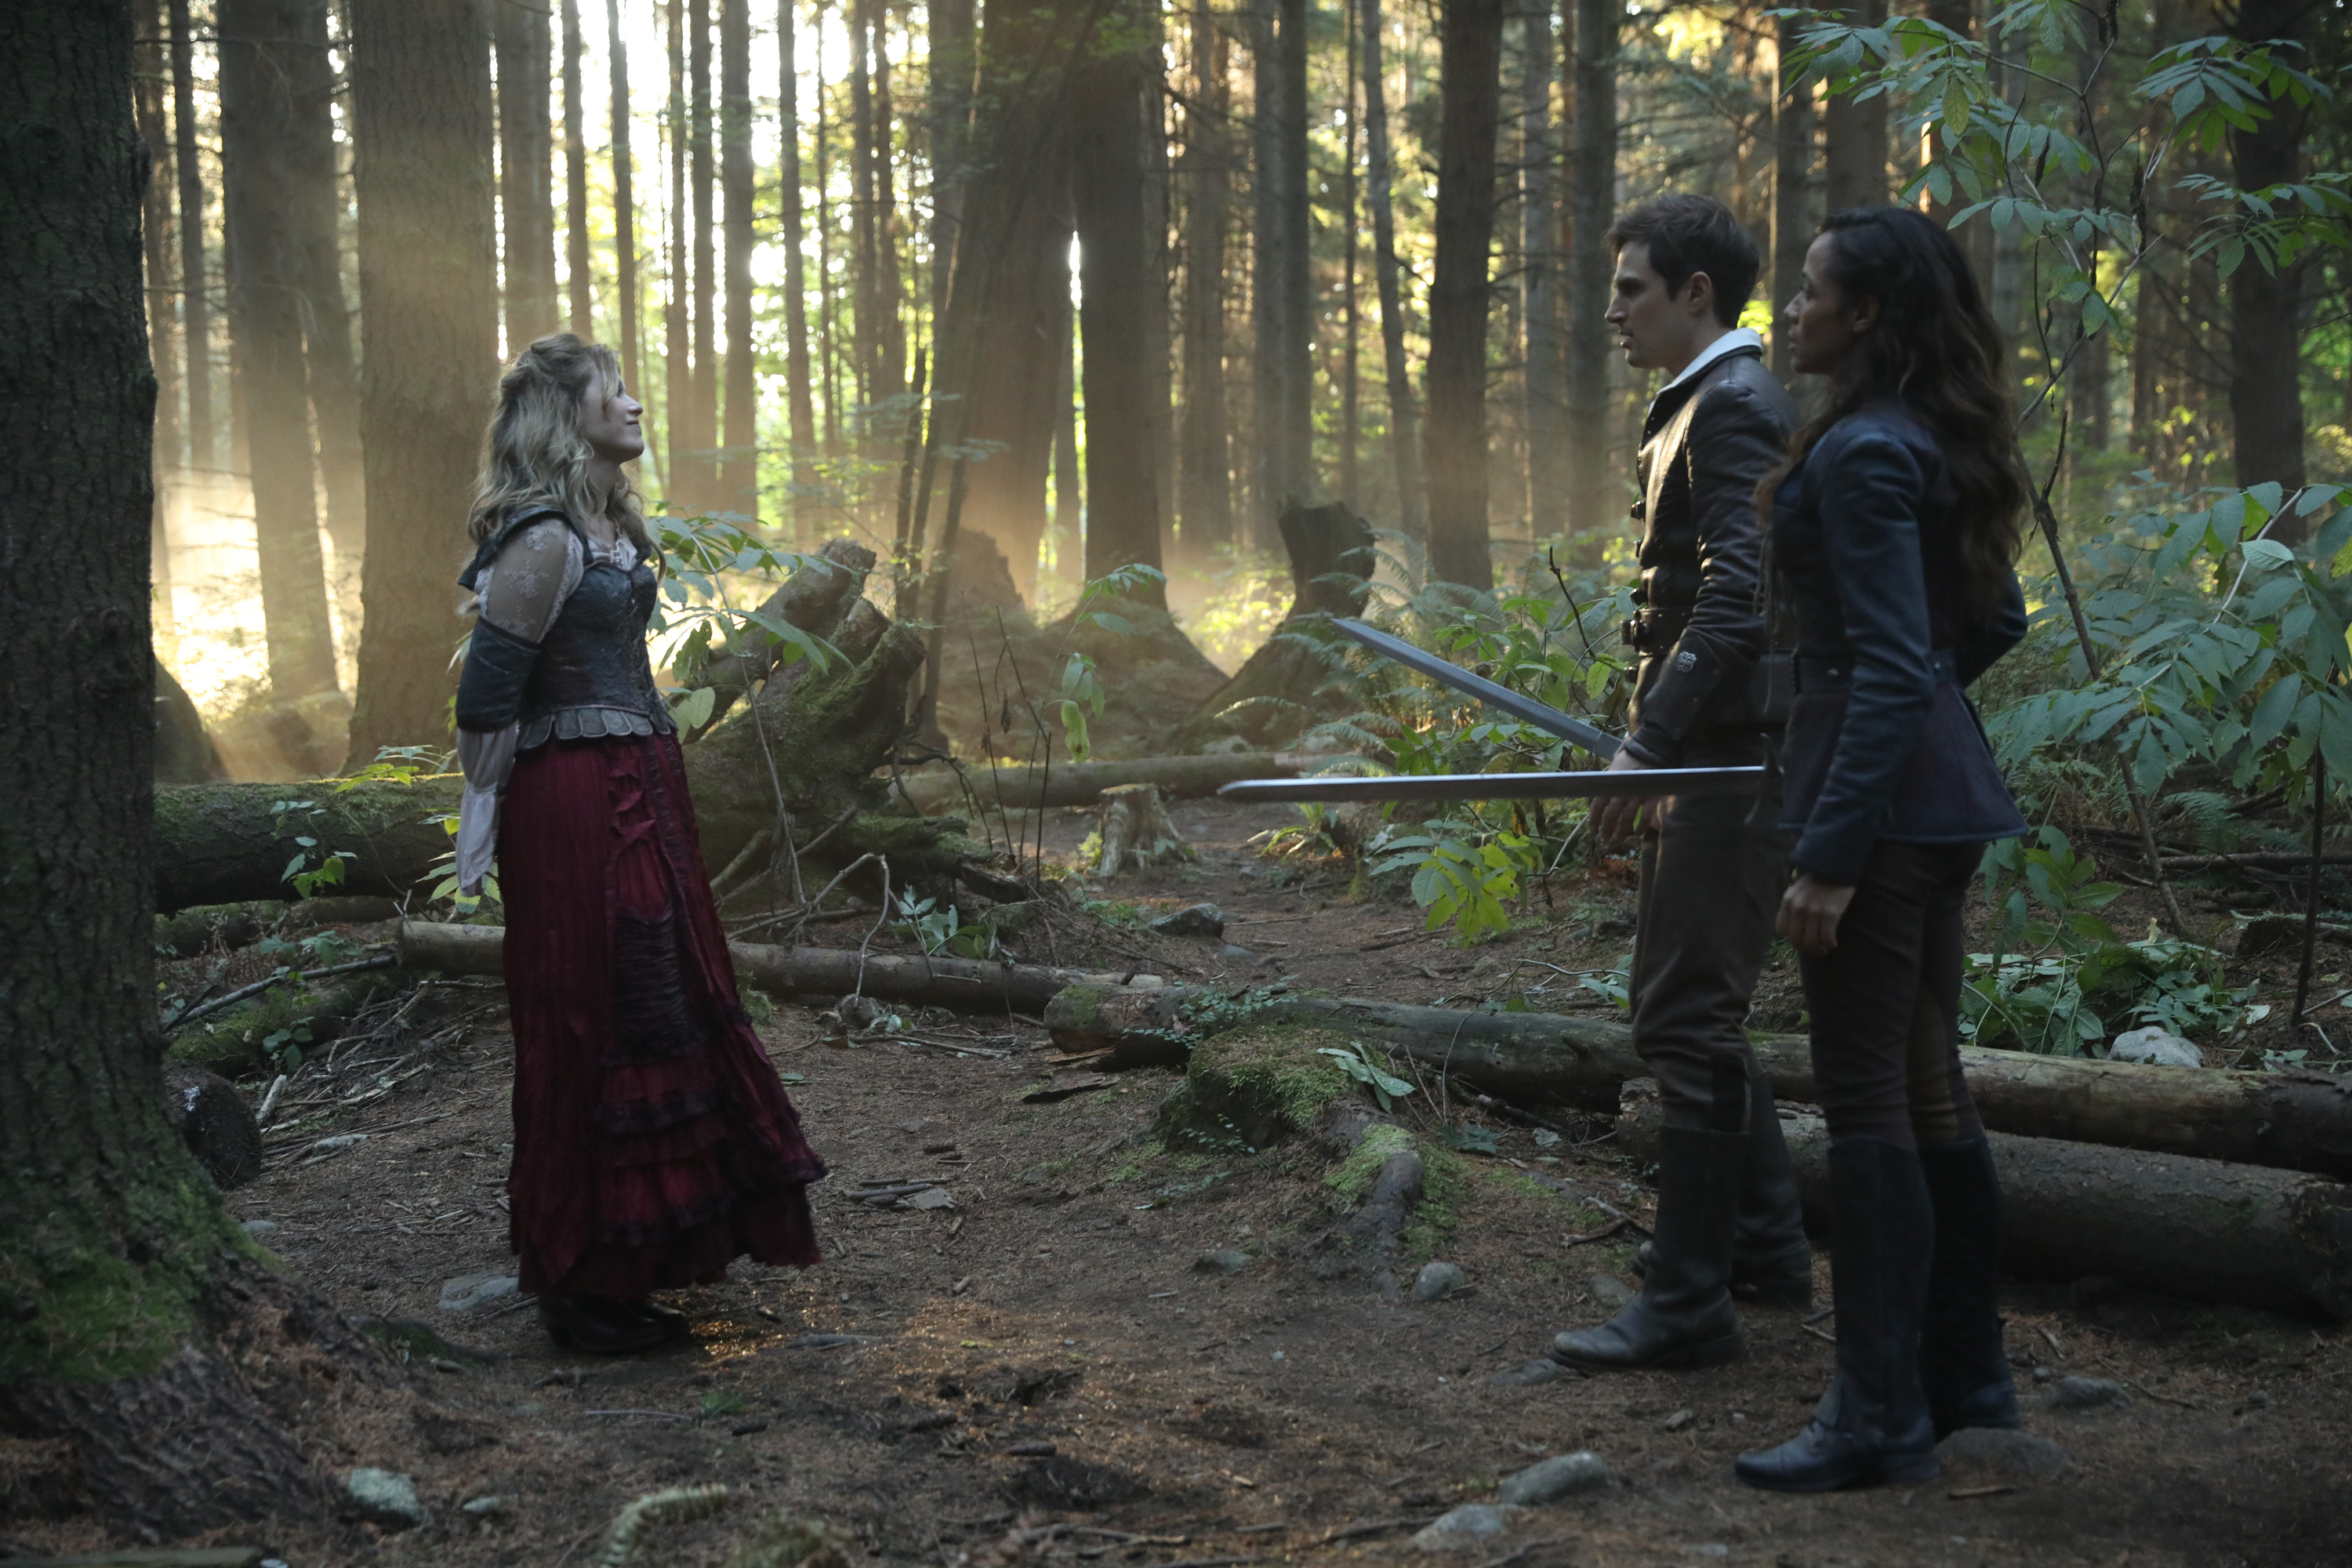 Once Upon A Time Images on Fanpop.